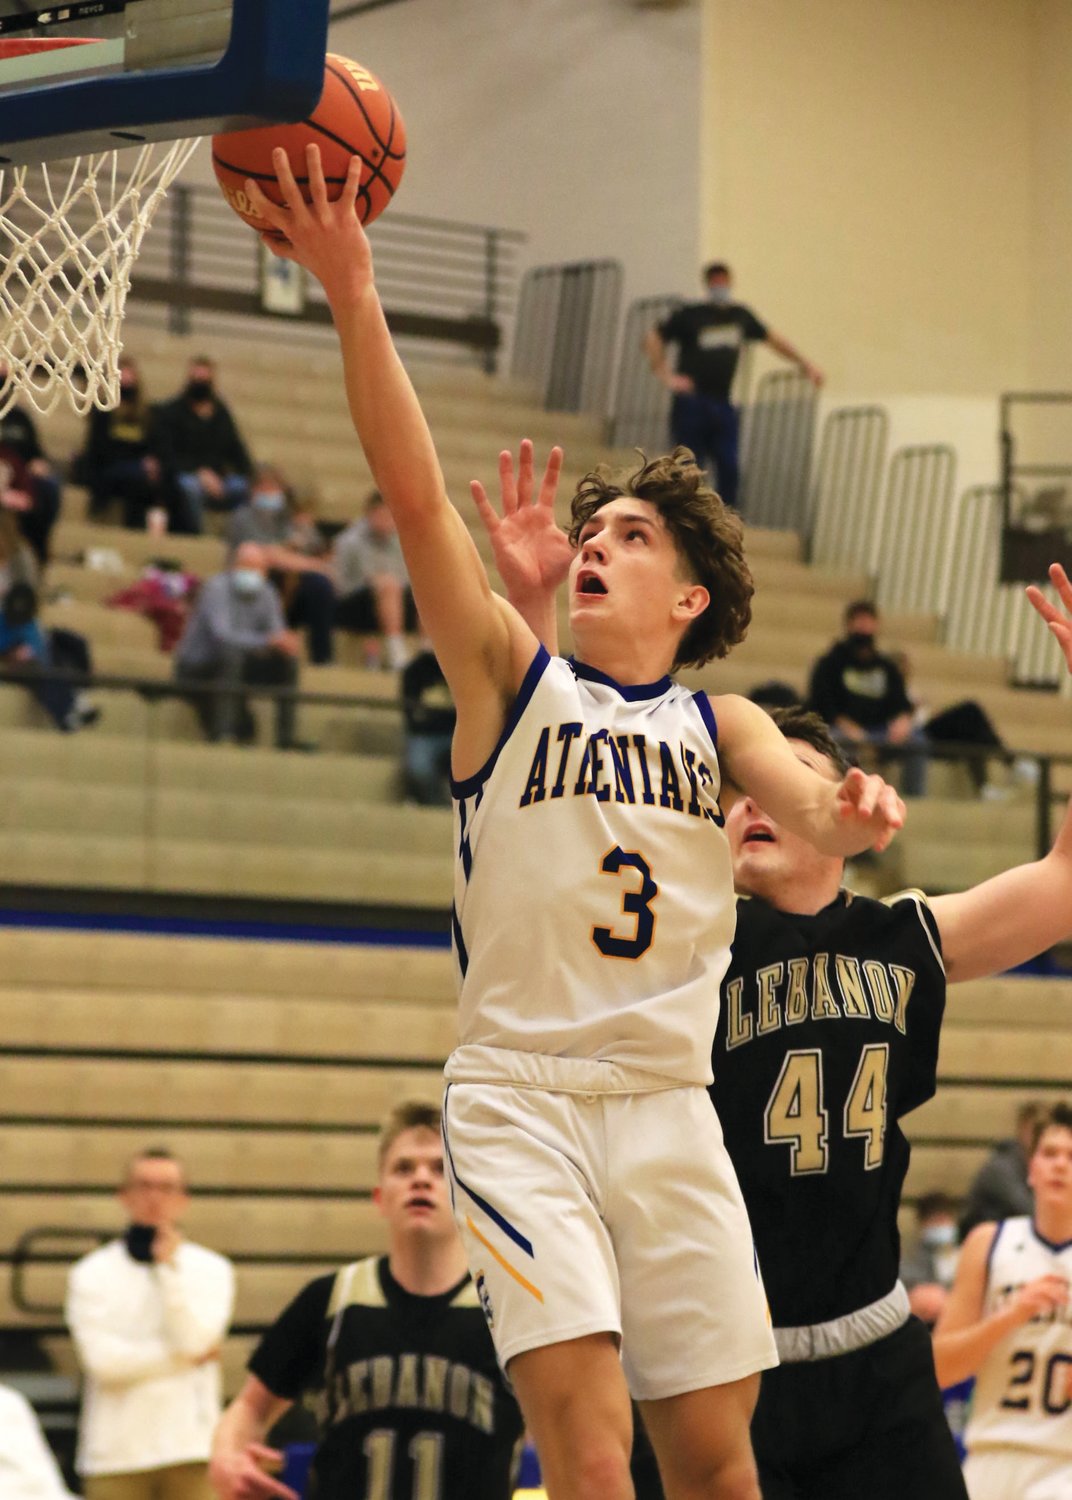 Crawfordsville’s Ty Lynas led the Athenians with 17 points in a 49-38 Sagamore Conference win over Lebanon on Wednesday night.